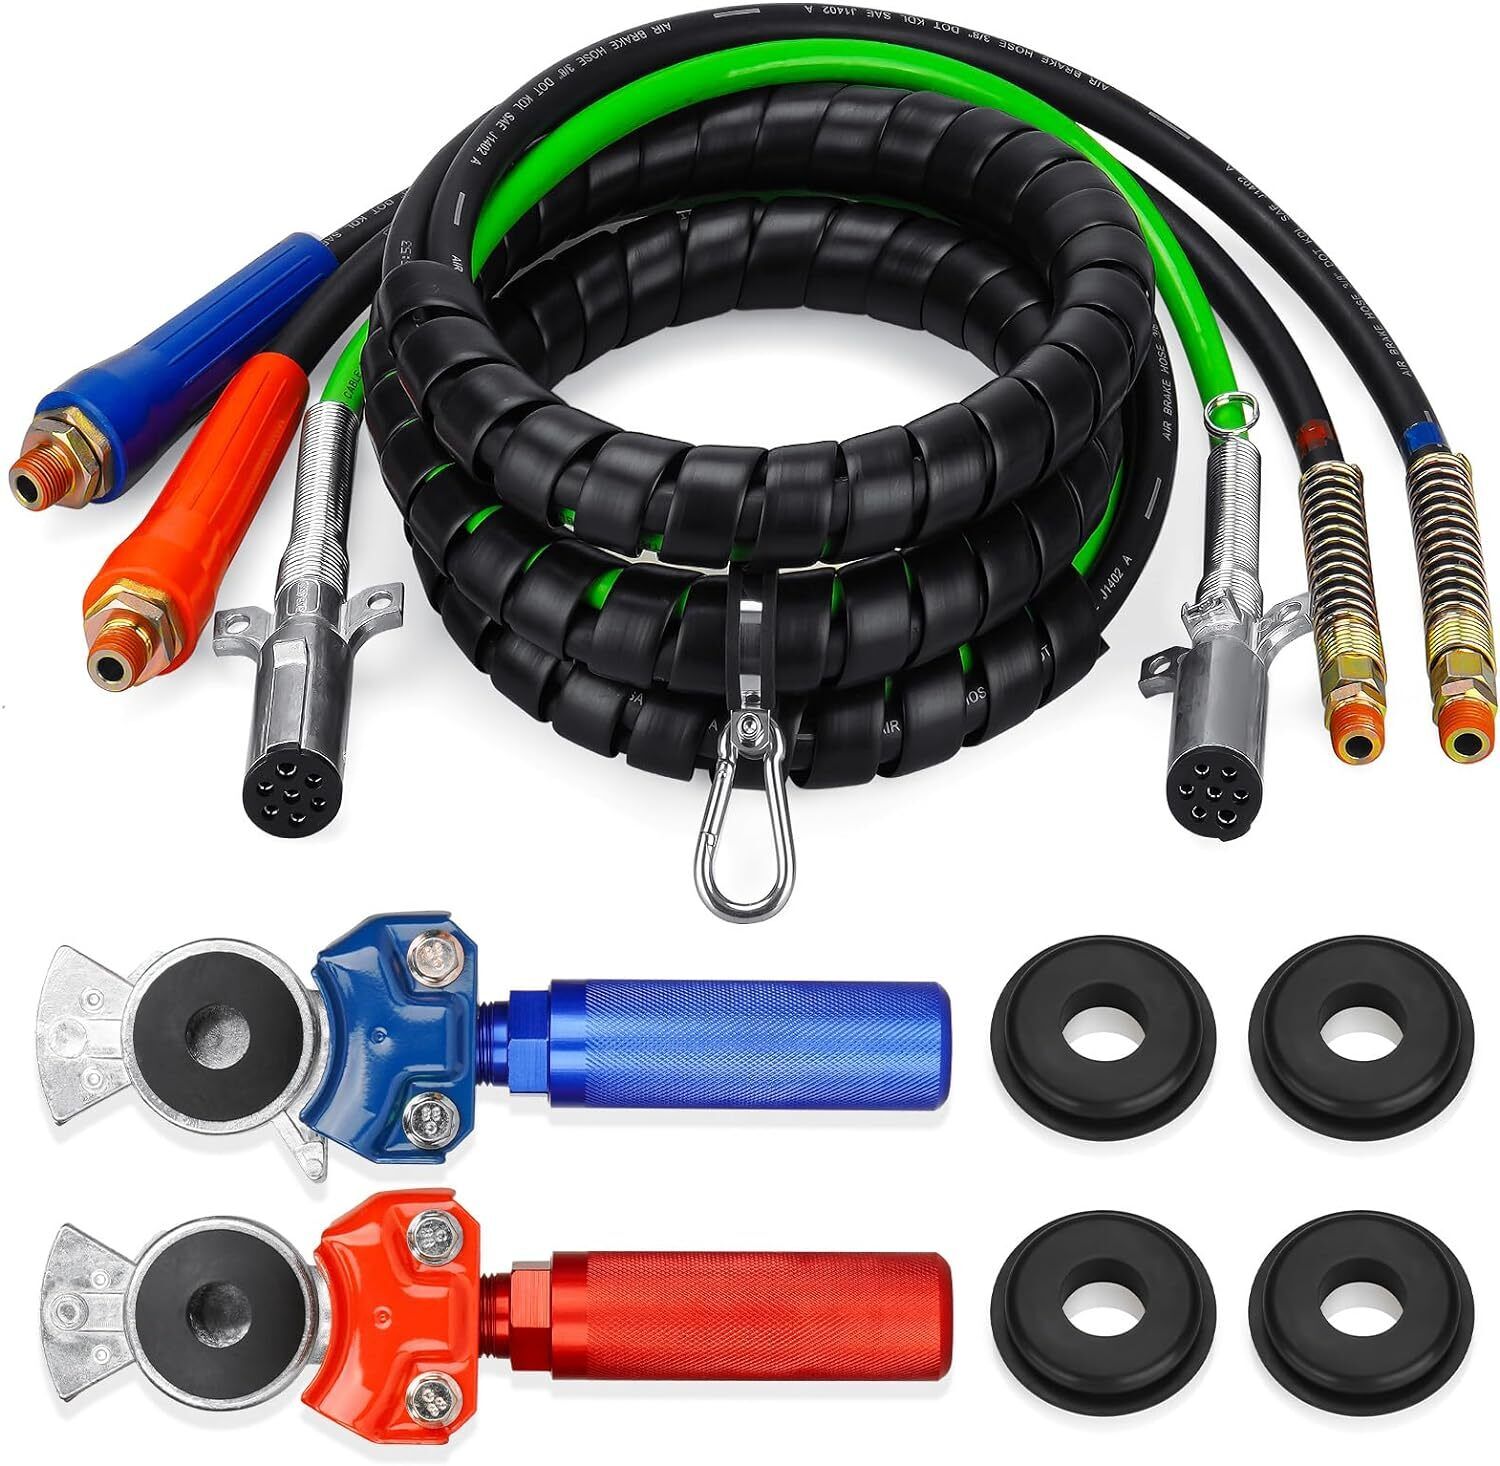 15ft 3 in 1 ABS & Air Hose Wrap 7 Way Electrical Cable for Semi Truck Trailer 